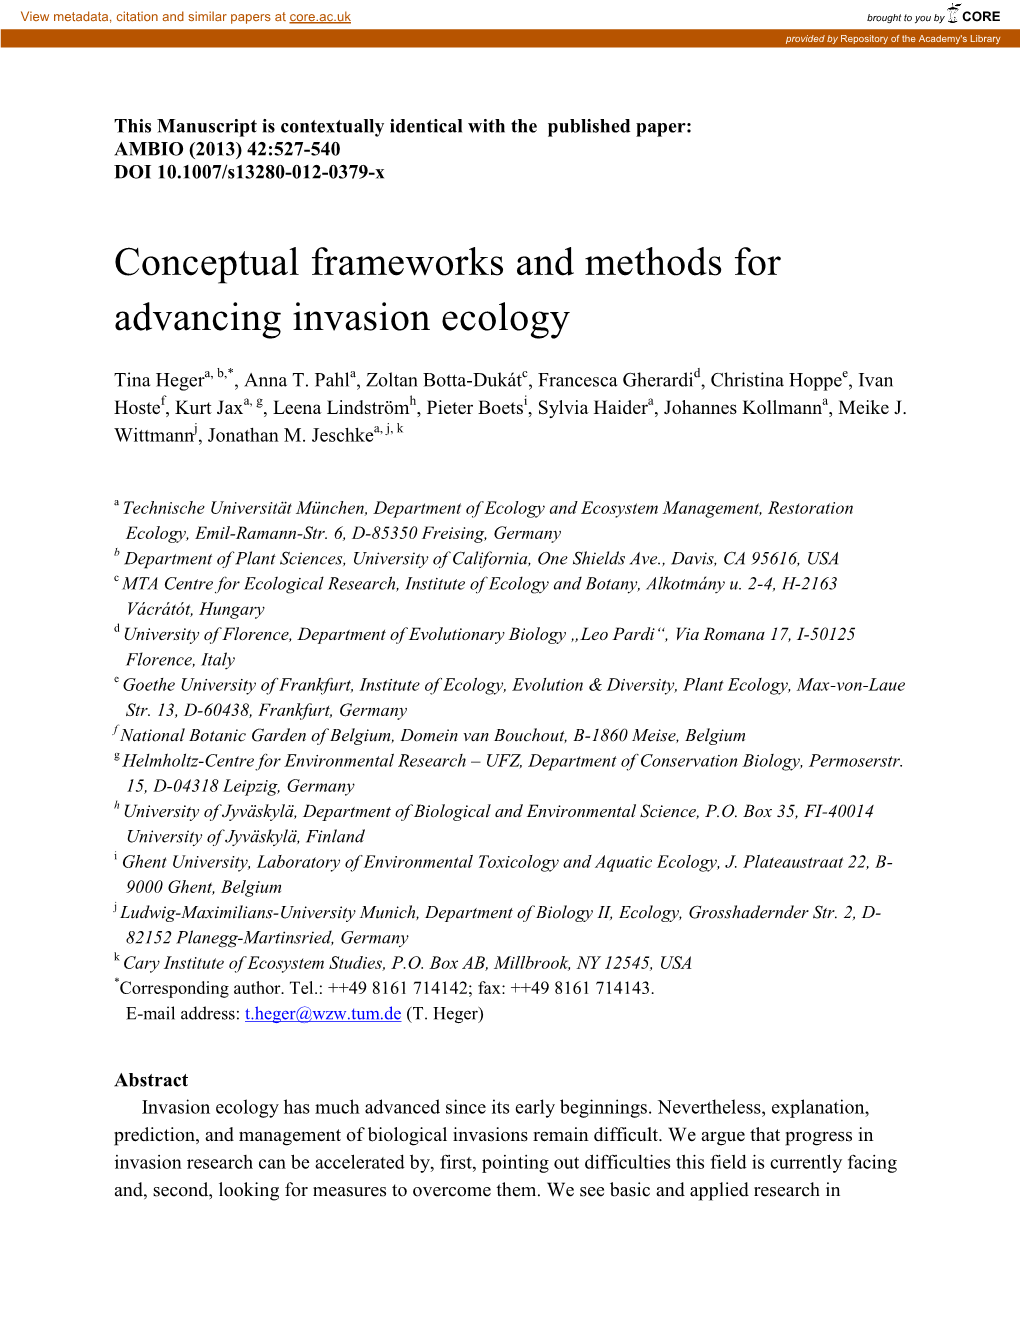 Conceptual Frameworks and Methods for Advancing Invasion Ecology